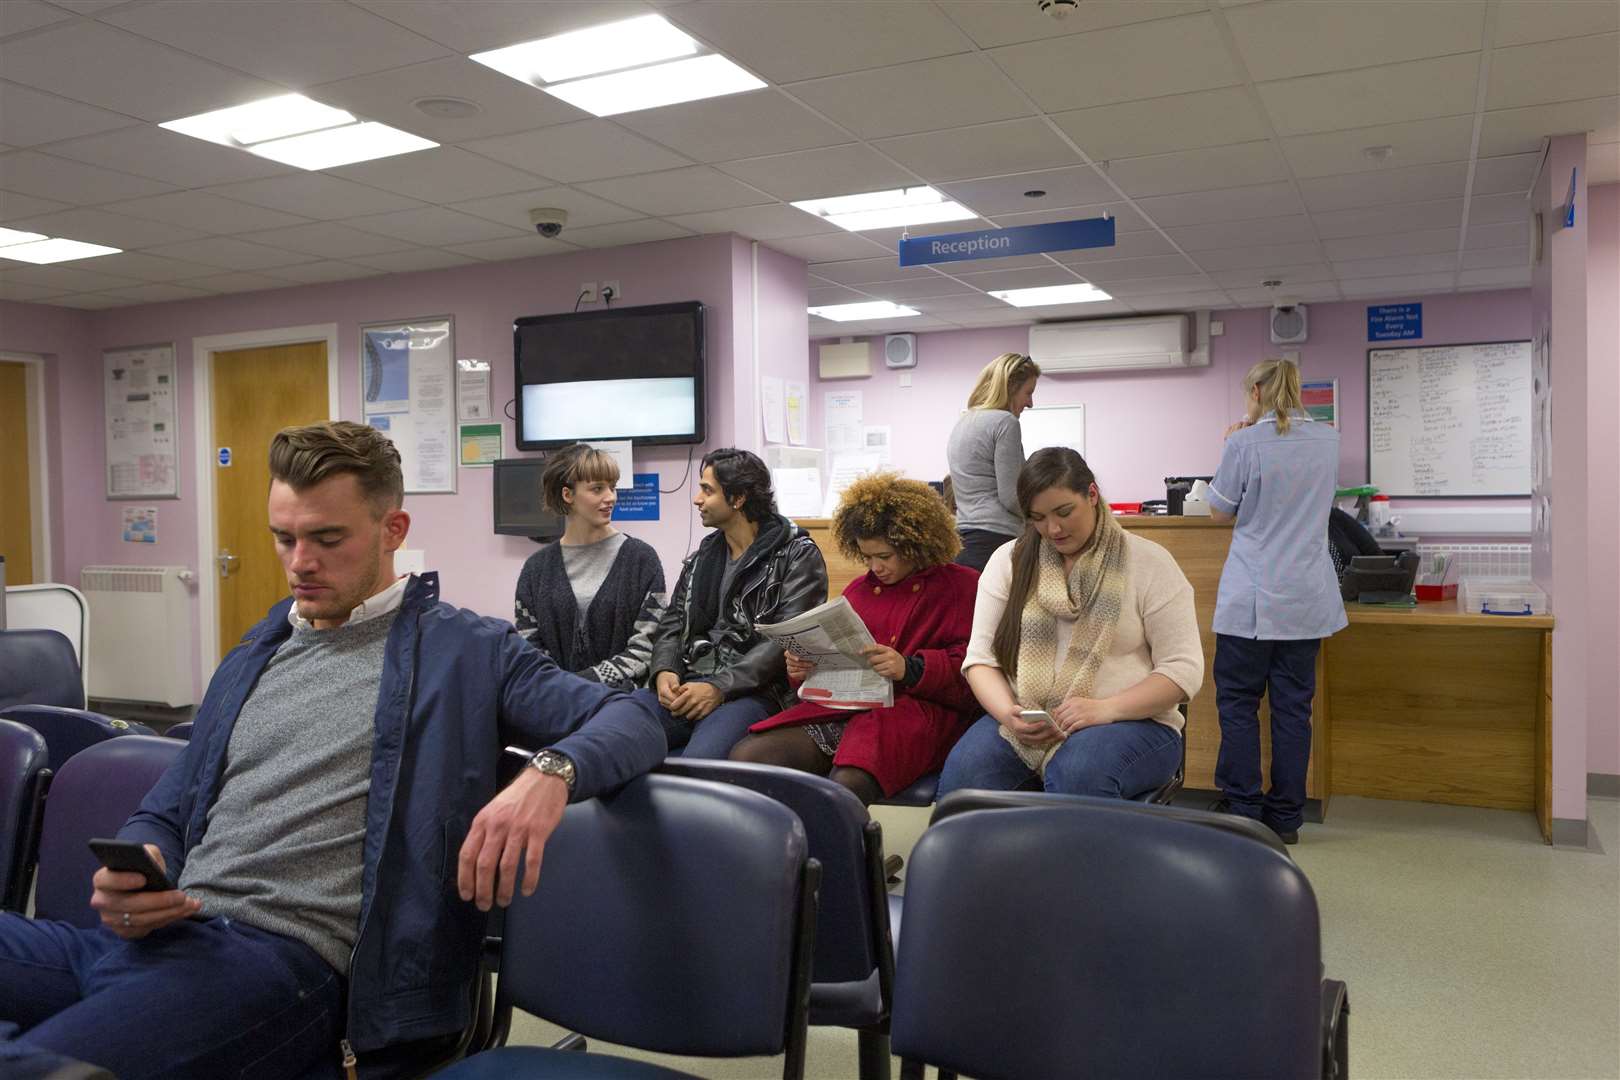 More than 9,000 patients waited four or more hours to be seen at A&E last month